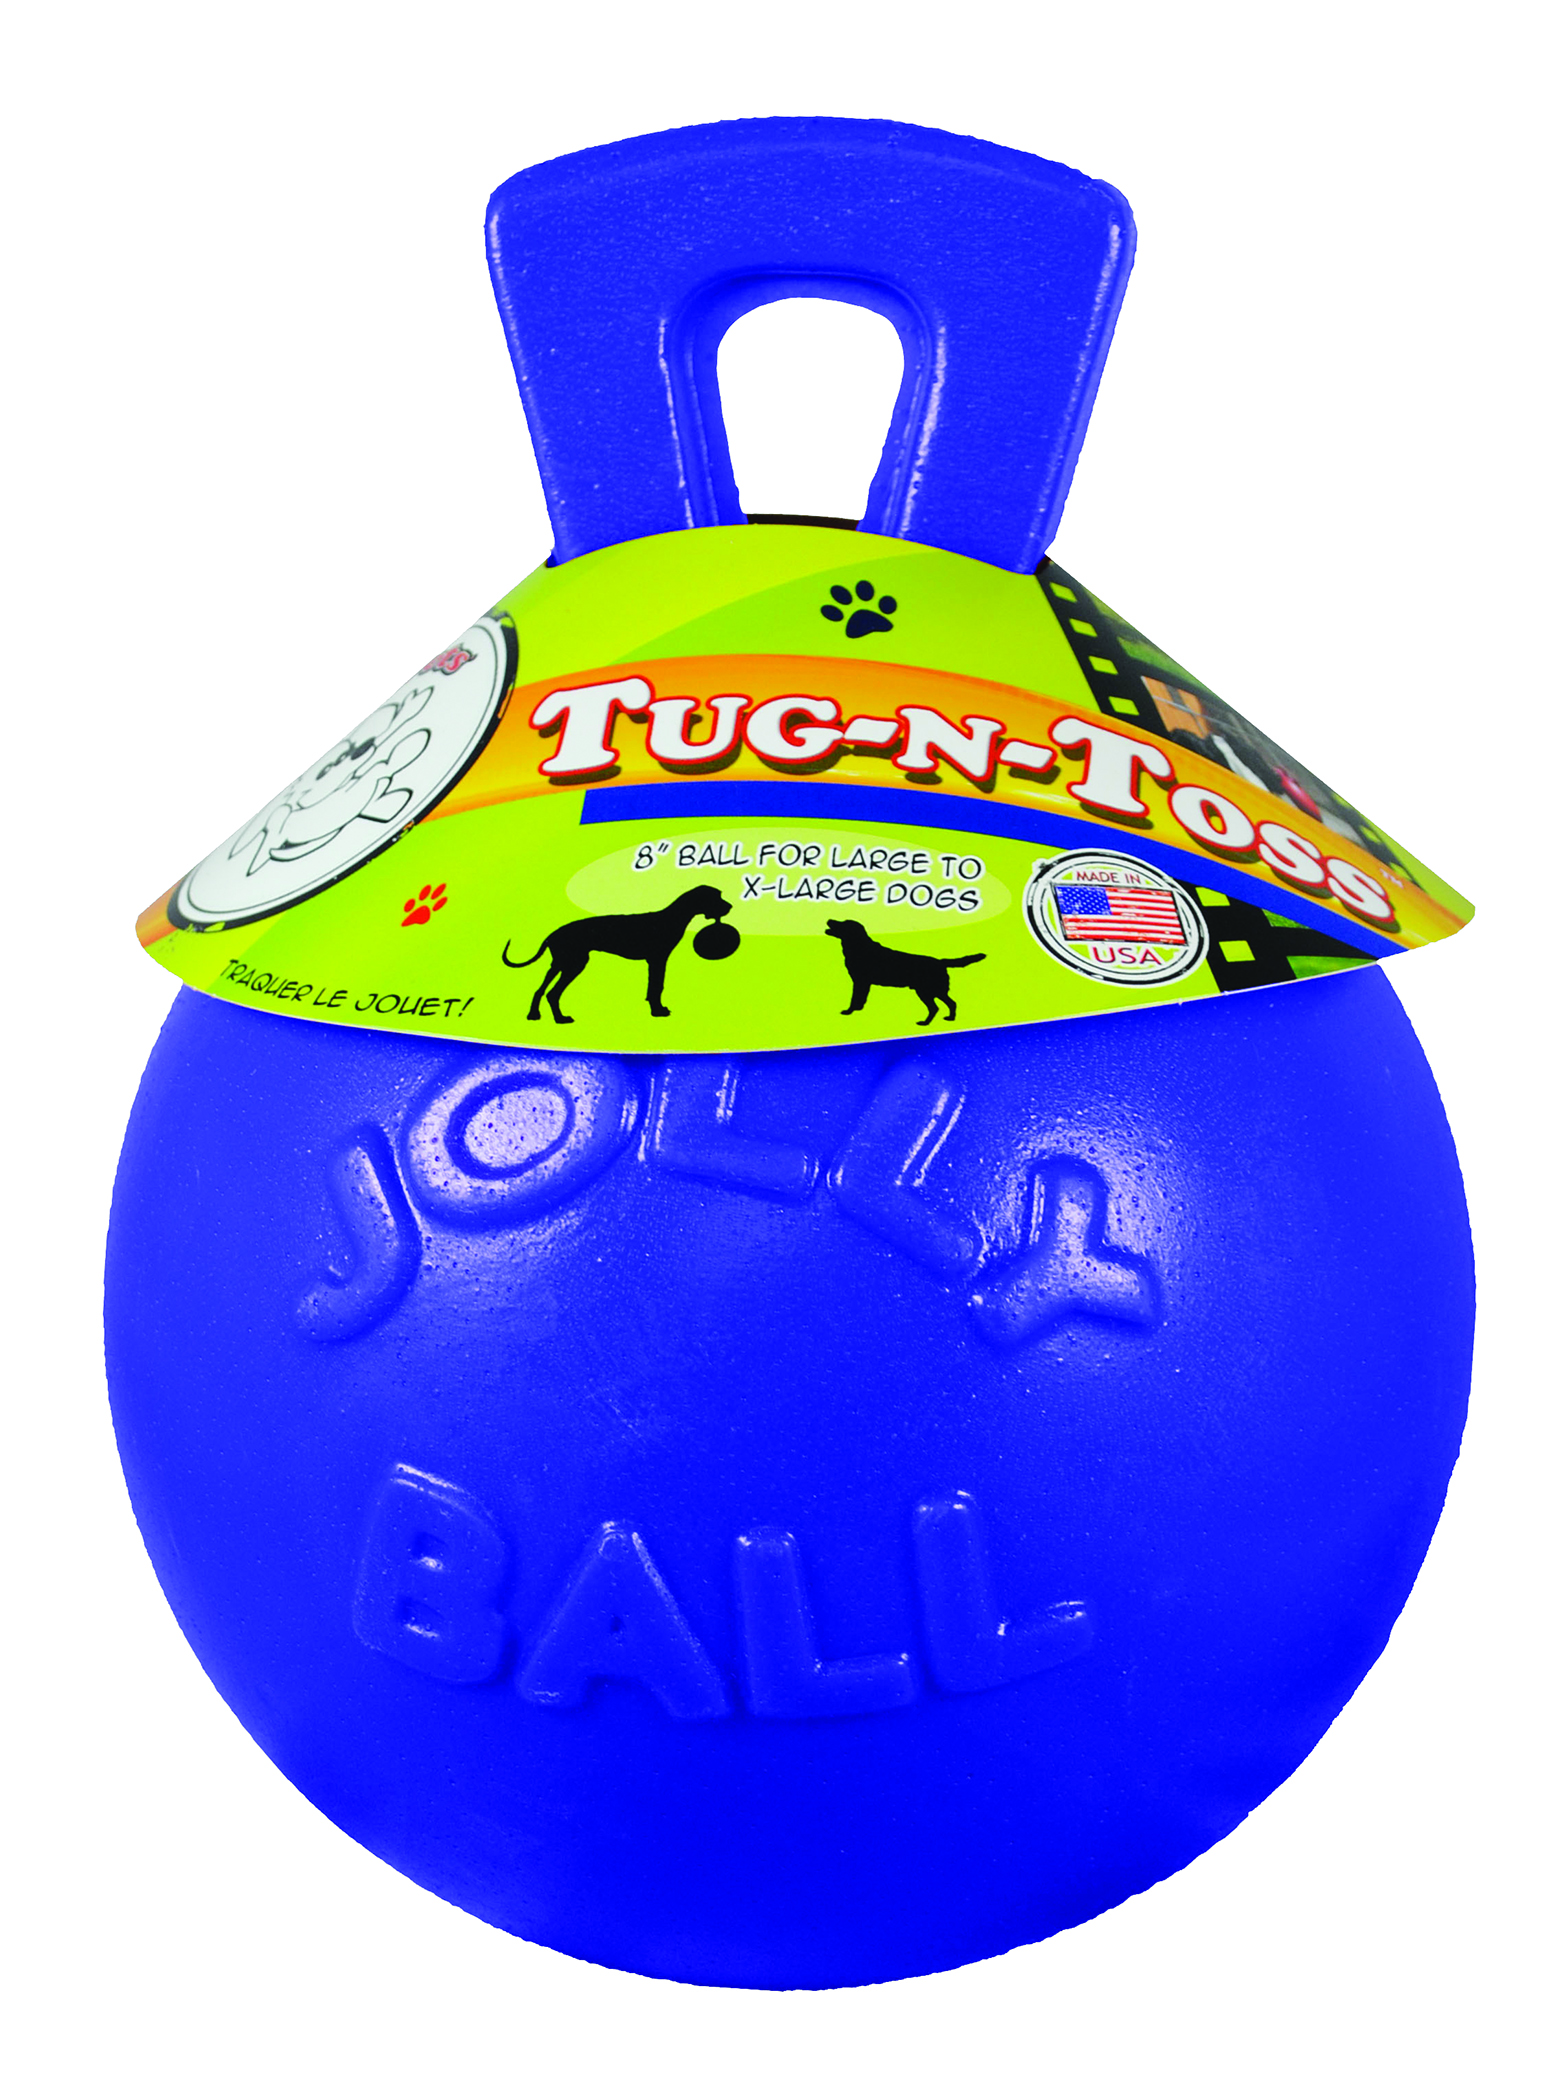 Blue Tug-N-Toss ball - 10 in dog toy